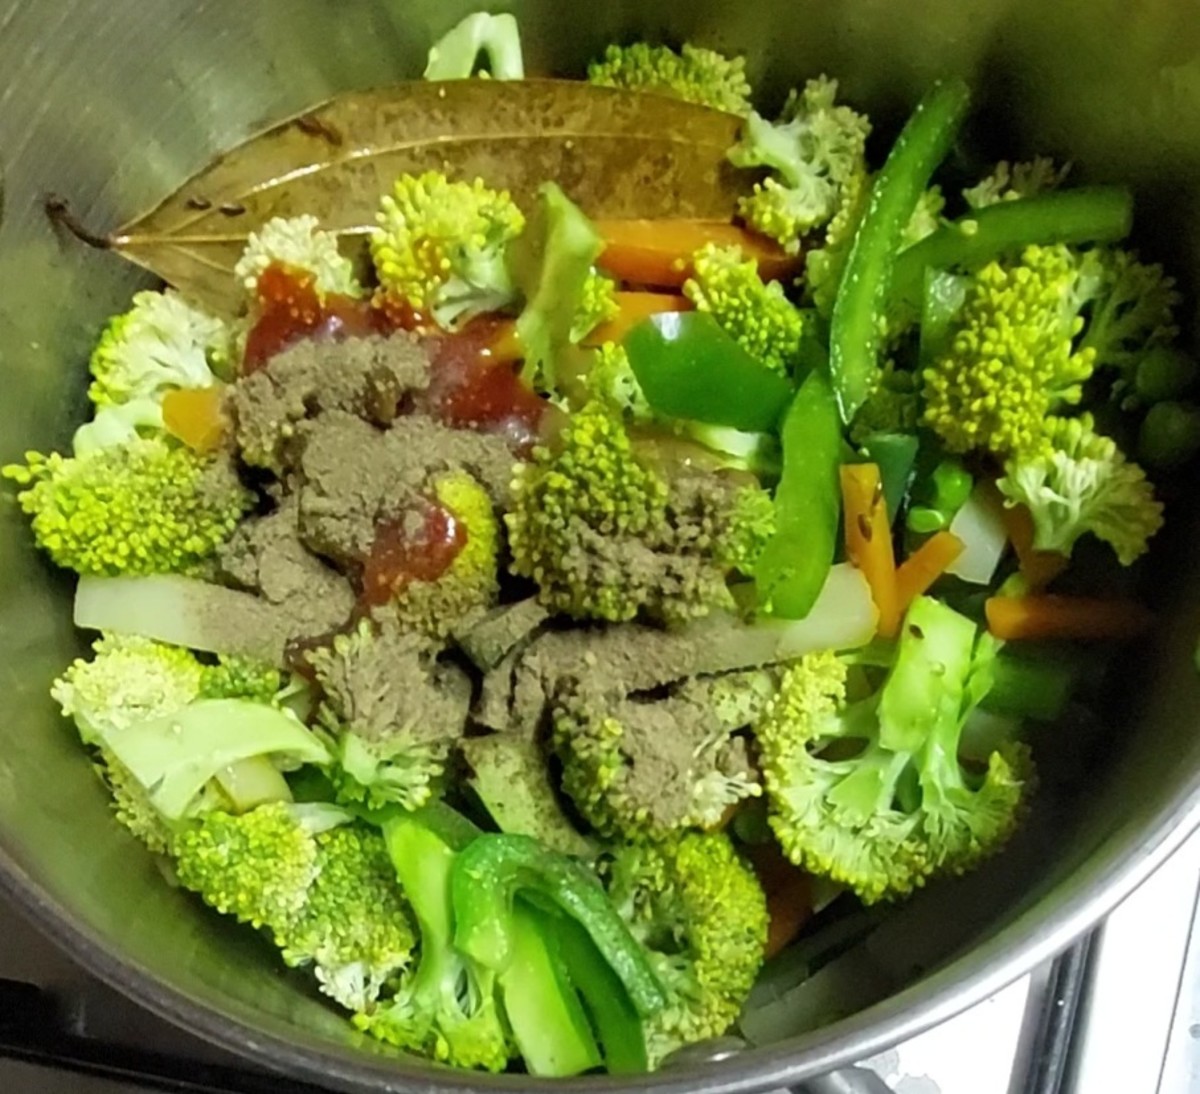 When vegetables are half cooked (about 10 minutes), open the lid and add capsicum and broccoli. Fry for 1 minute. Add 2 tablespoons tomato sauce, 1 tablespoon green chili sauce and 1 tablespoon pepper powder.